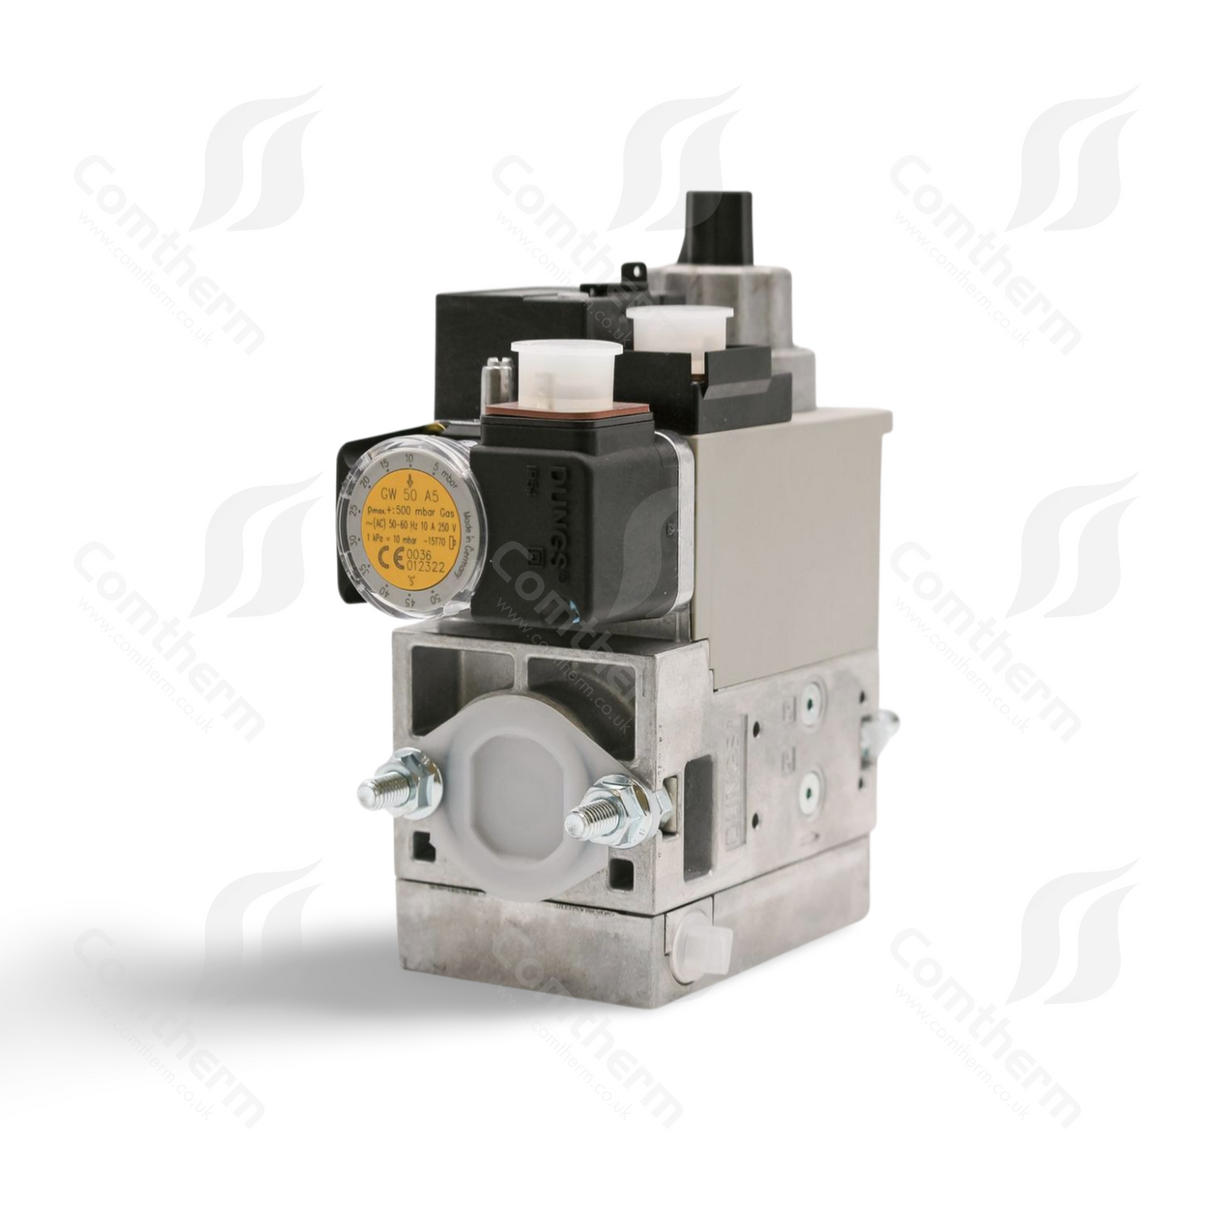 Dungs MB-DLE 407 B01 S52 + GW150A5 Multiblock-Gasventil – 230 V 